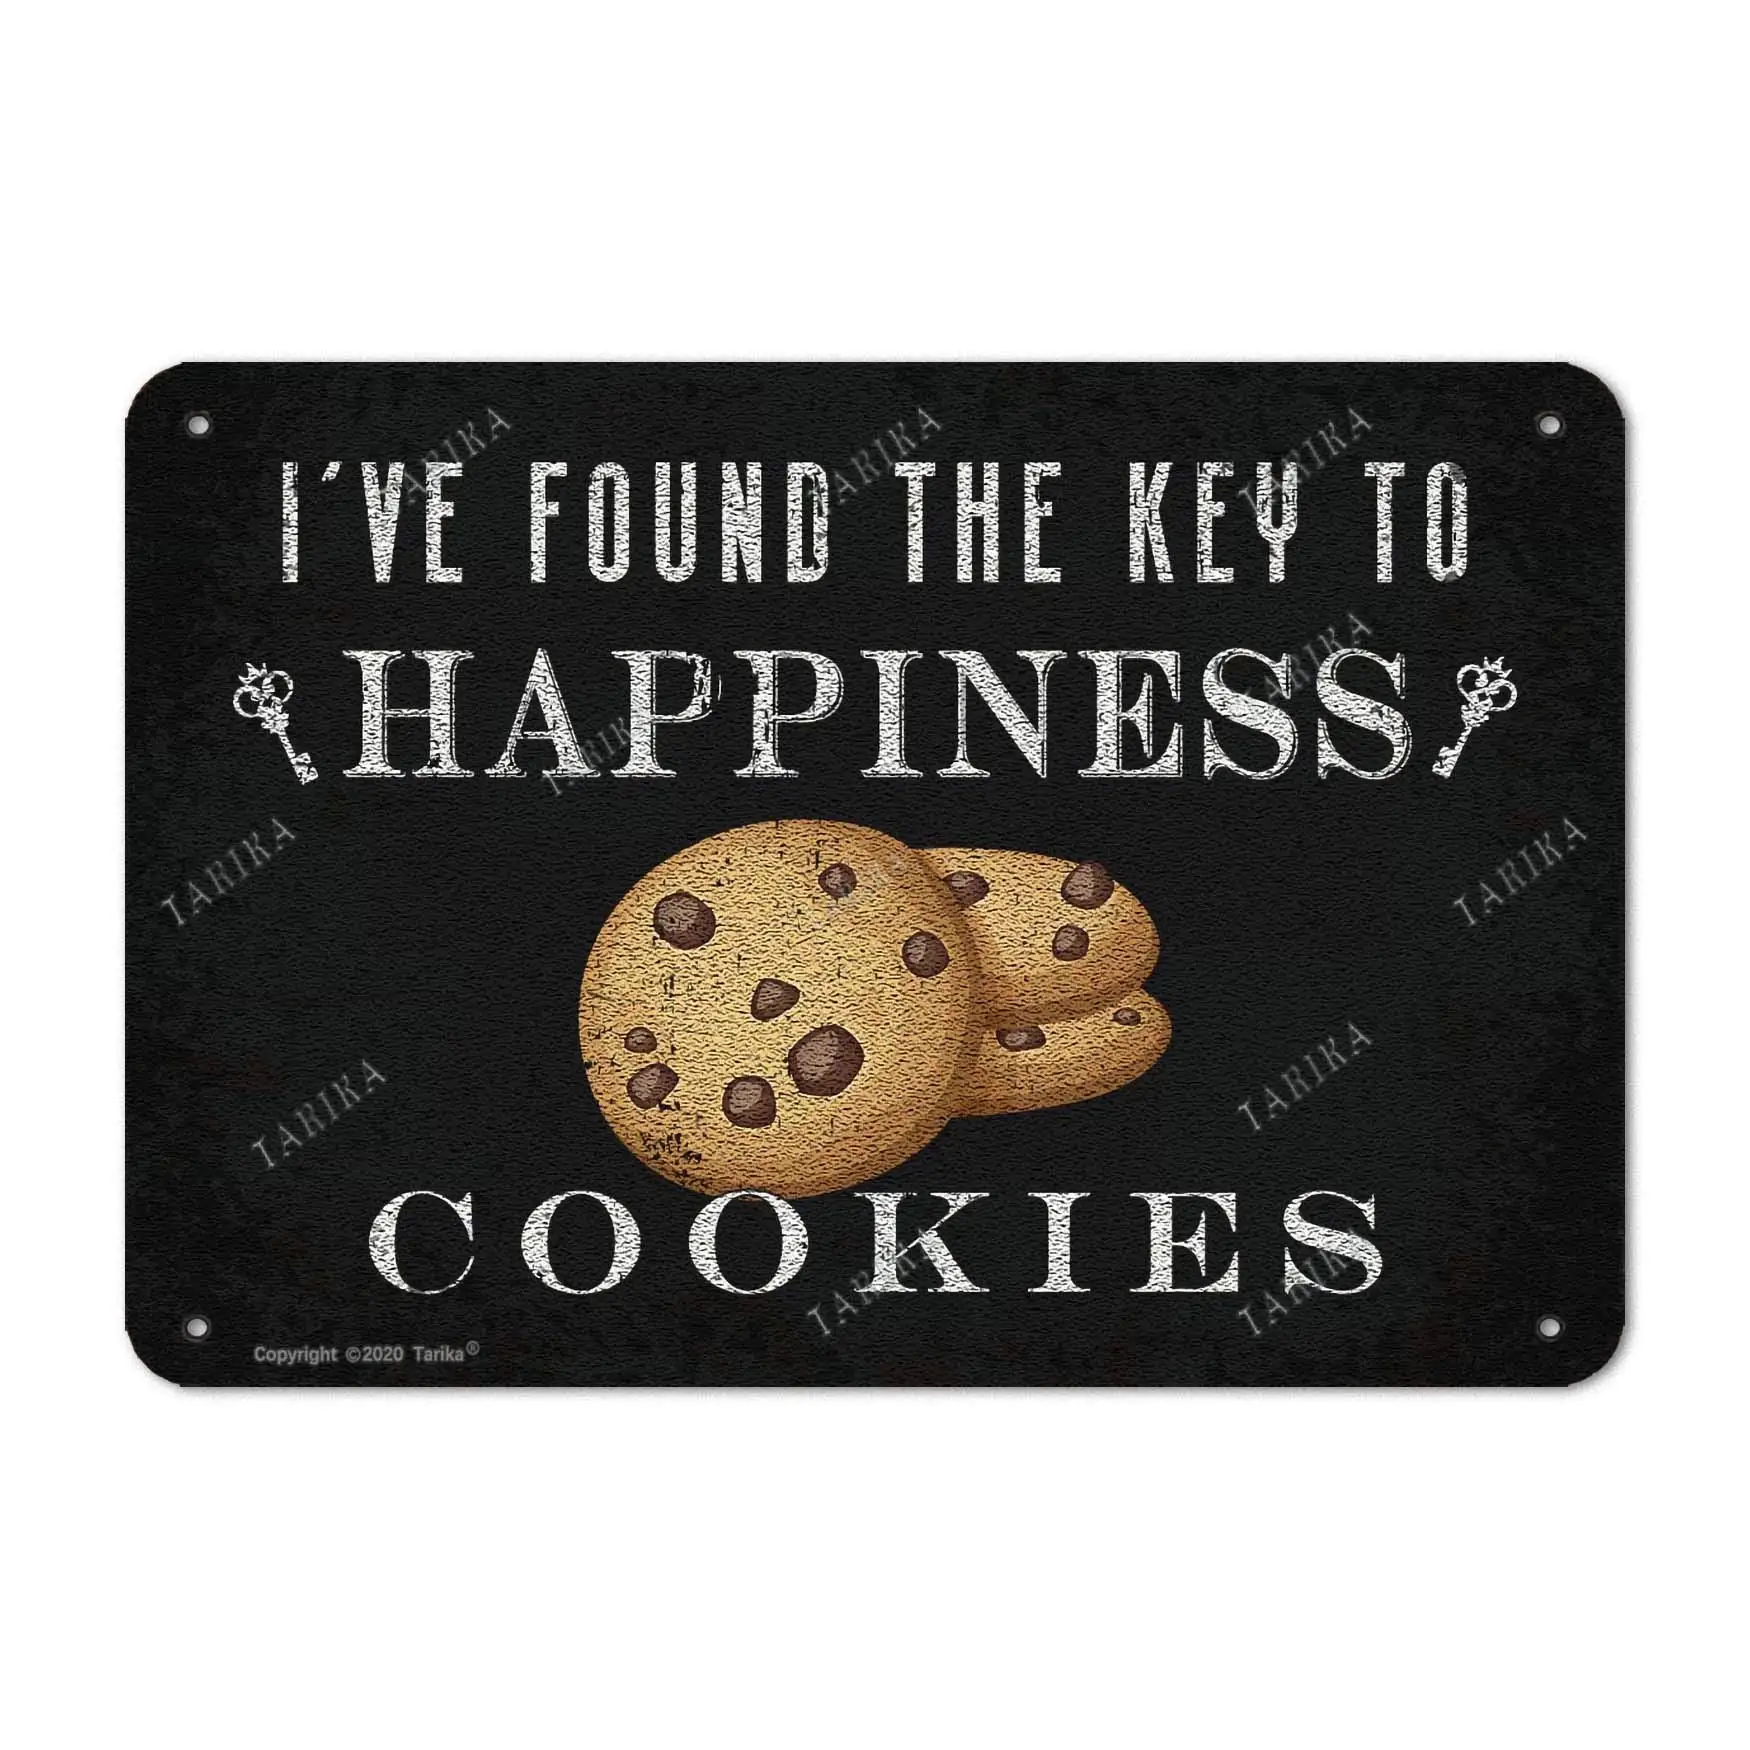 

I've Found The Key to Happiness Cookies Retro Look 20X30 cm Iron Decoration Poster Sign for Home Kitchen Living Room Farm Funny